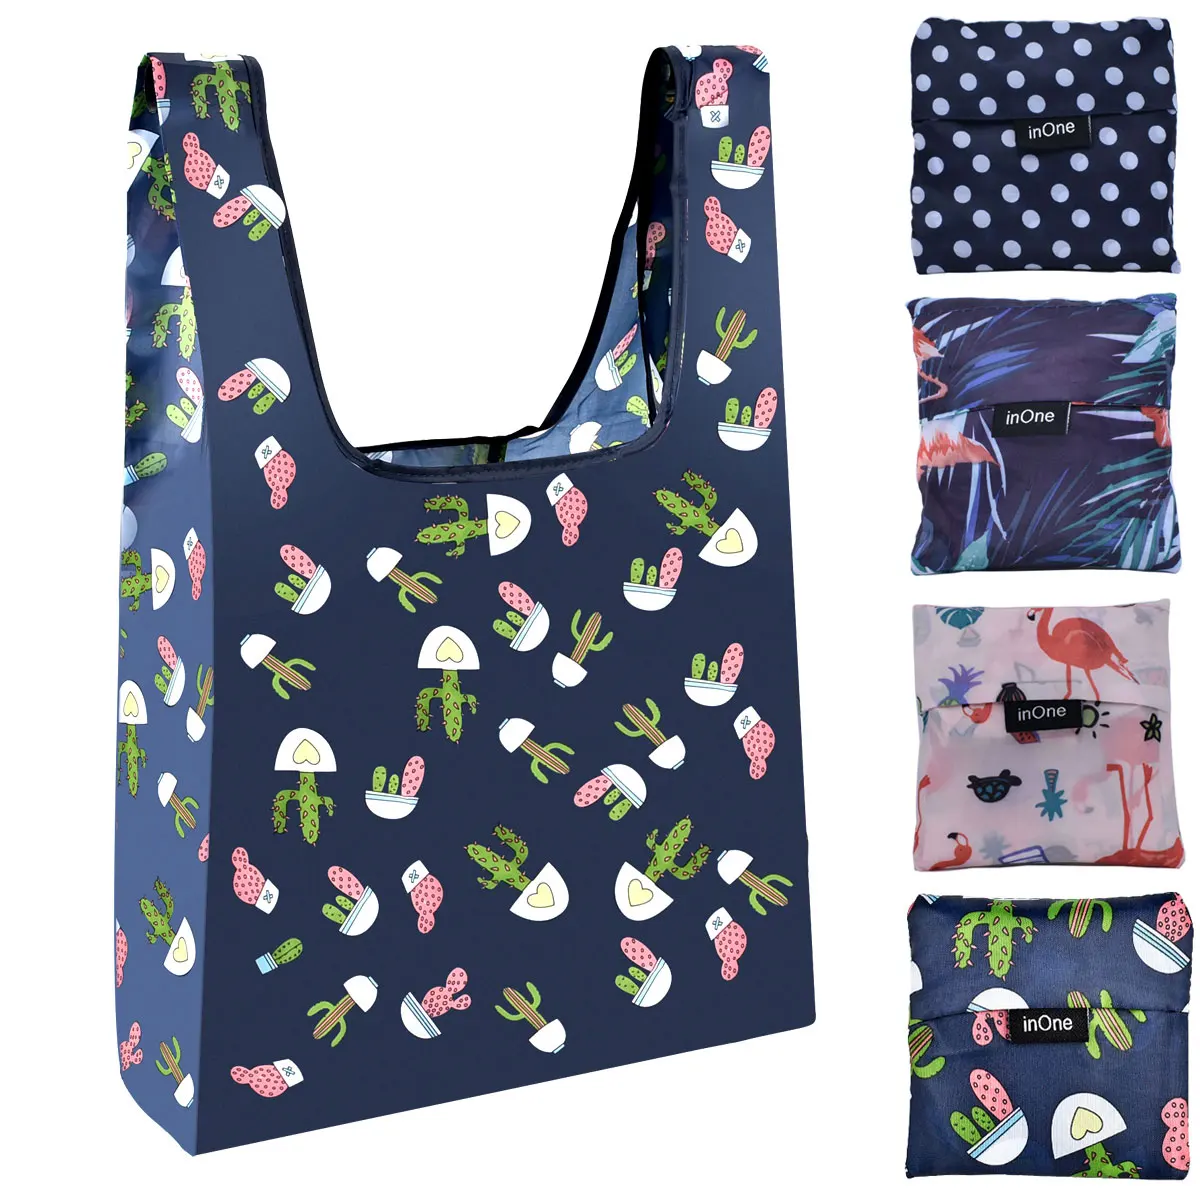 

flamingo cactus polka dots customize pattern polyester portable recyclable eco grocery reusable foldable nylon shopping bag, Multi